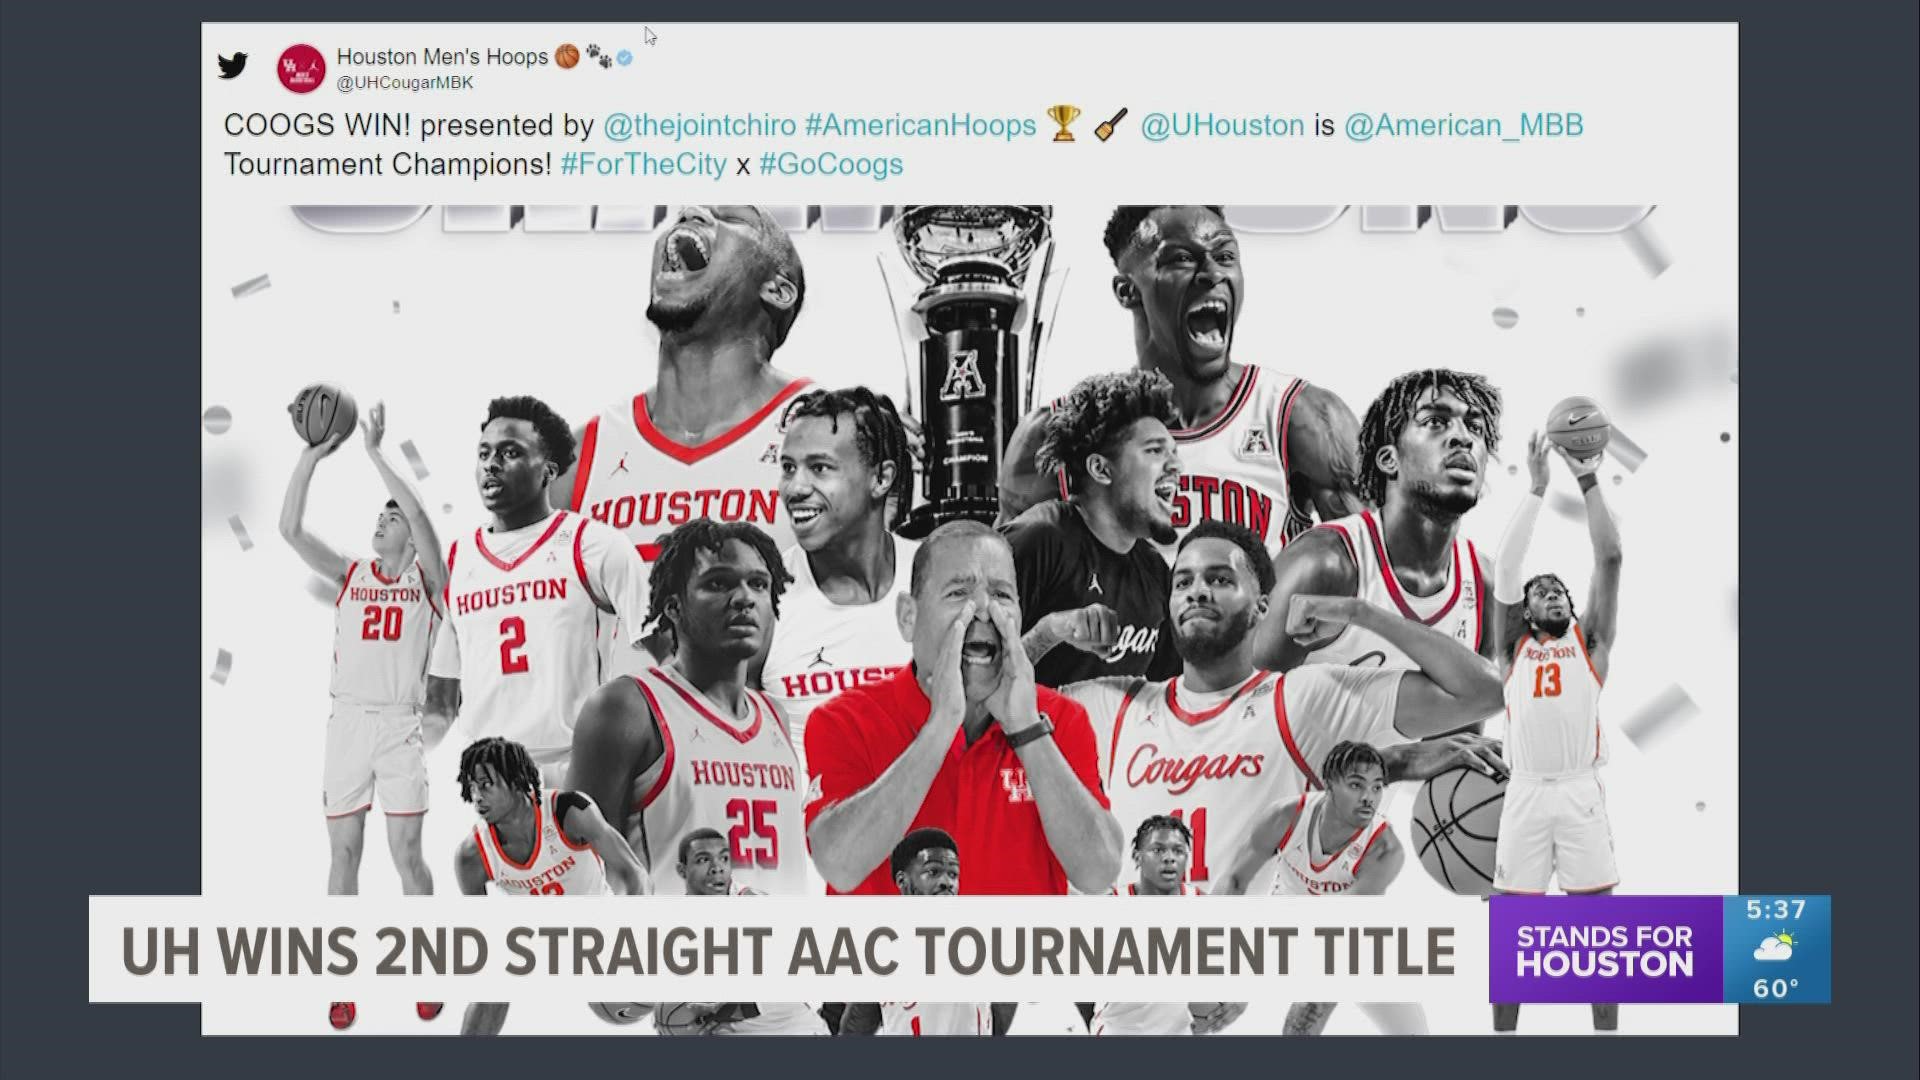 After winning the regular-season conference title, the Coogs won the conference tourney title ahead of Selection Sunday.